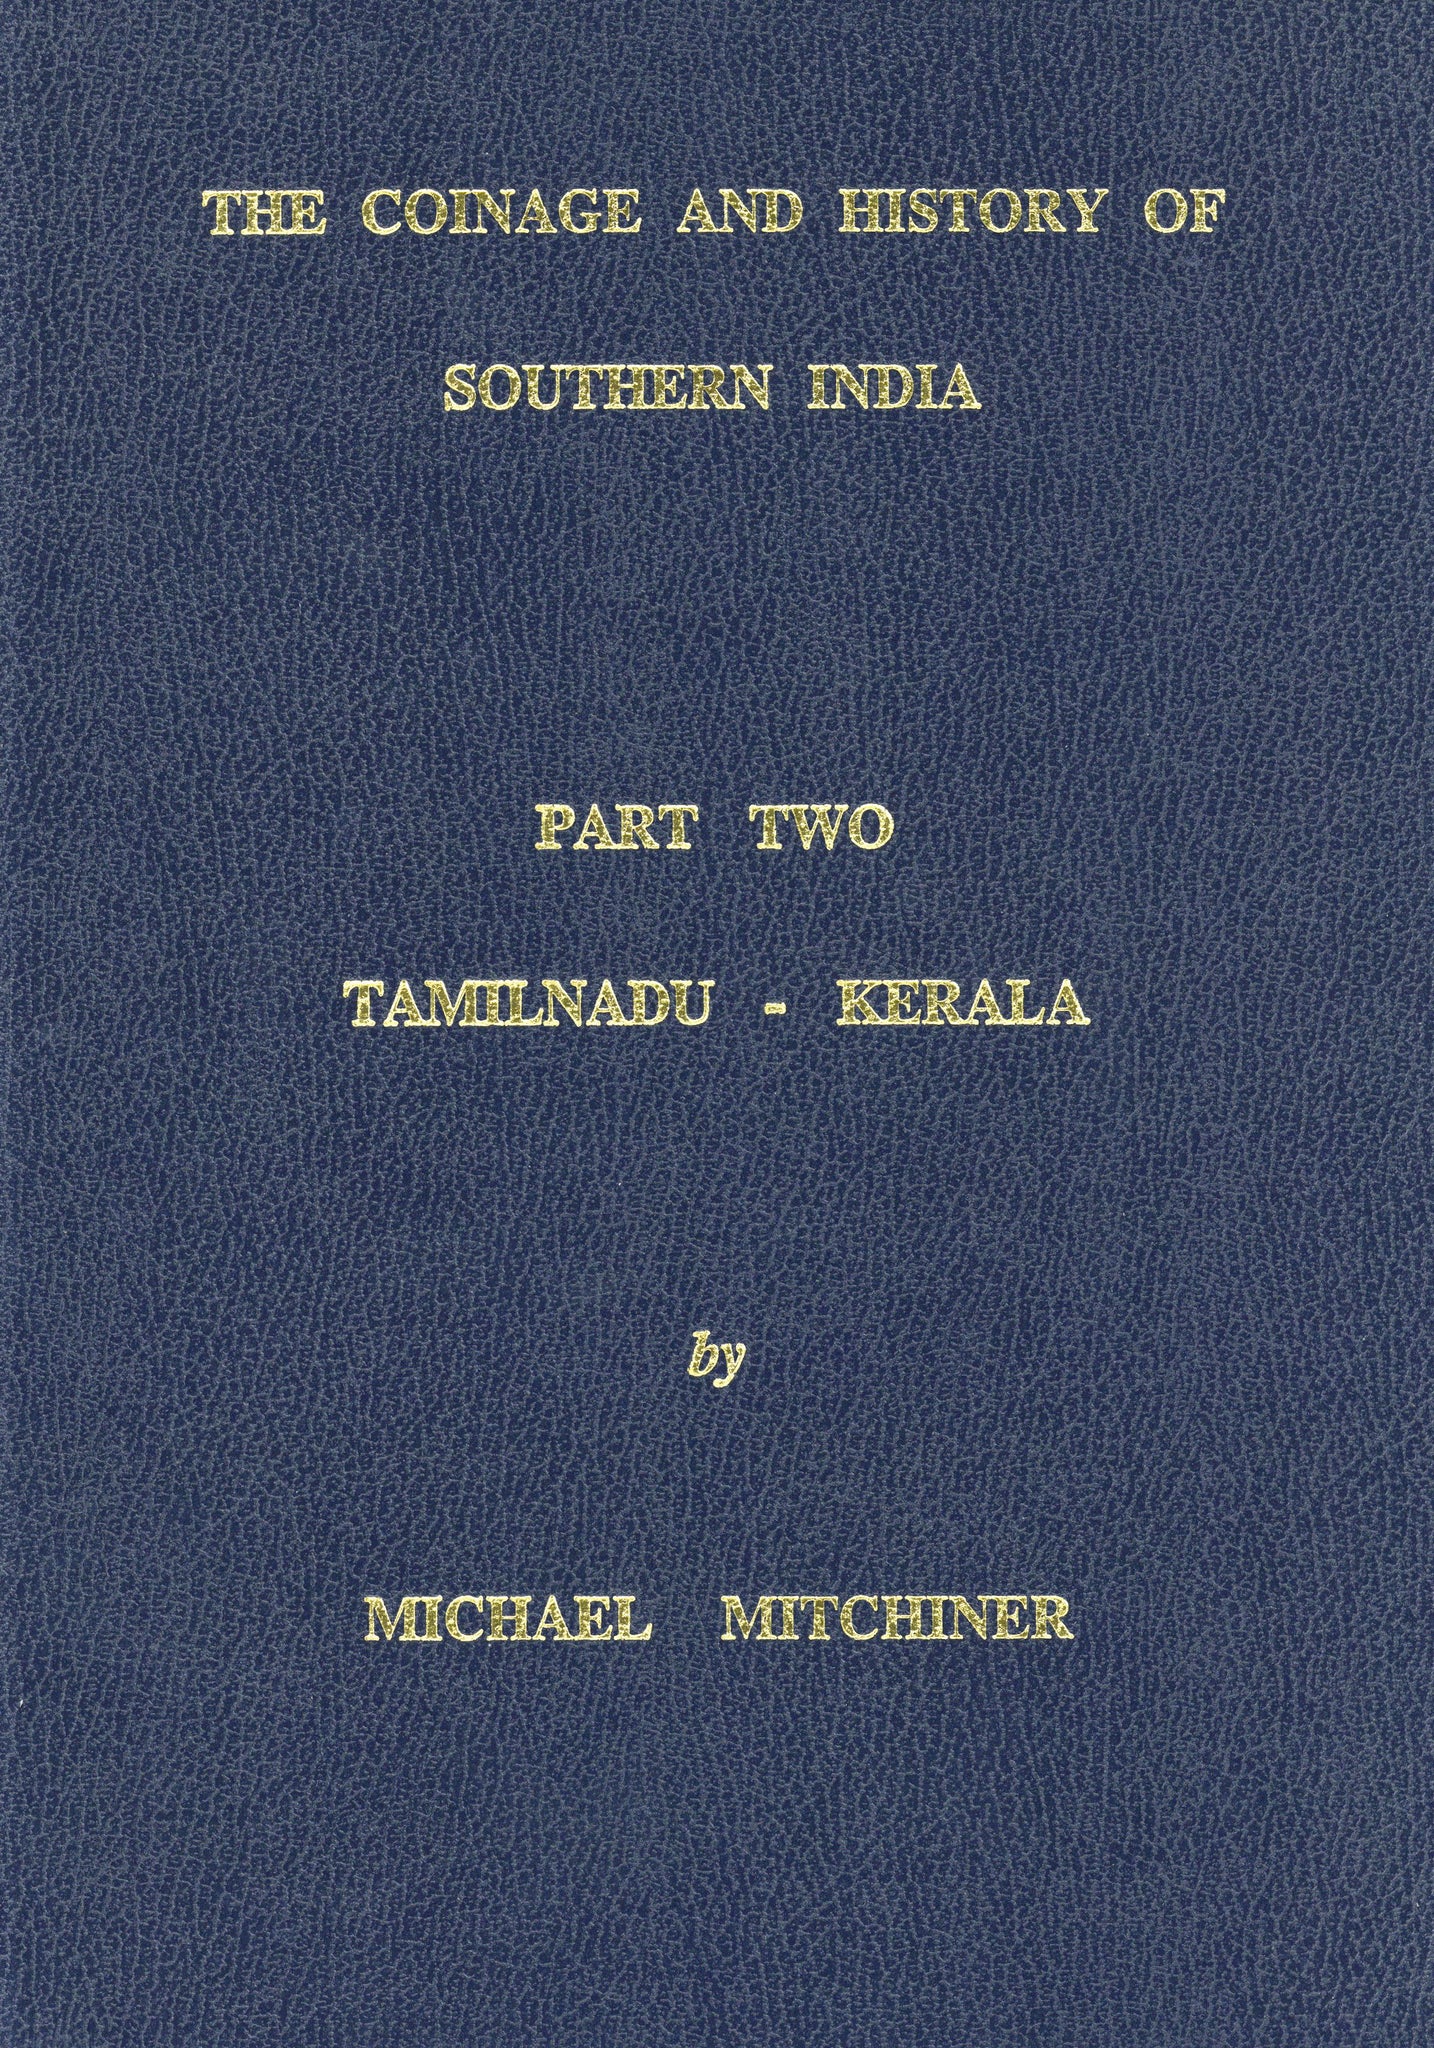 The Coinage and History of Southern India - Part 2: Tamilnadu - Kerala by Michael Mitchiner